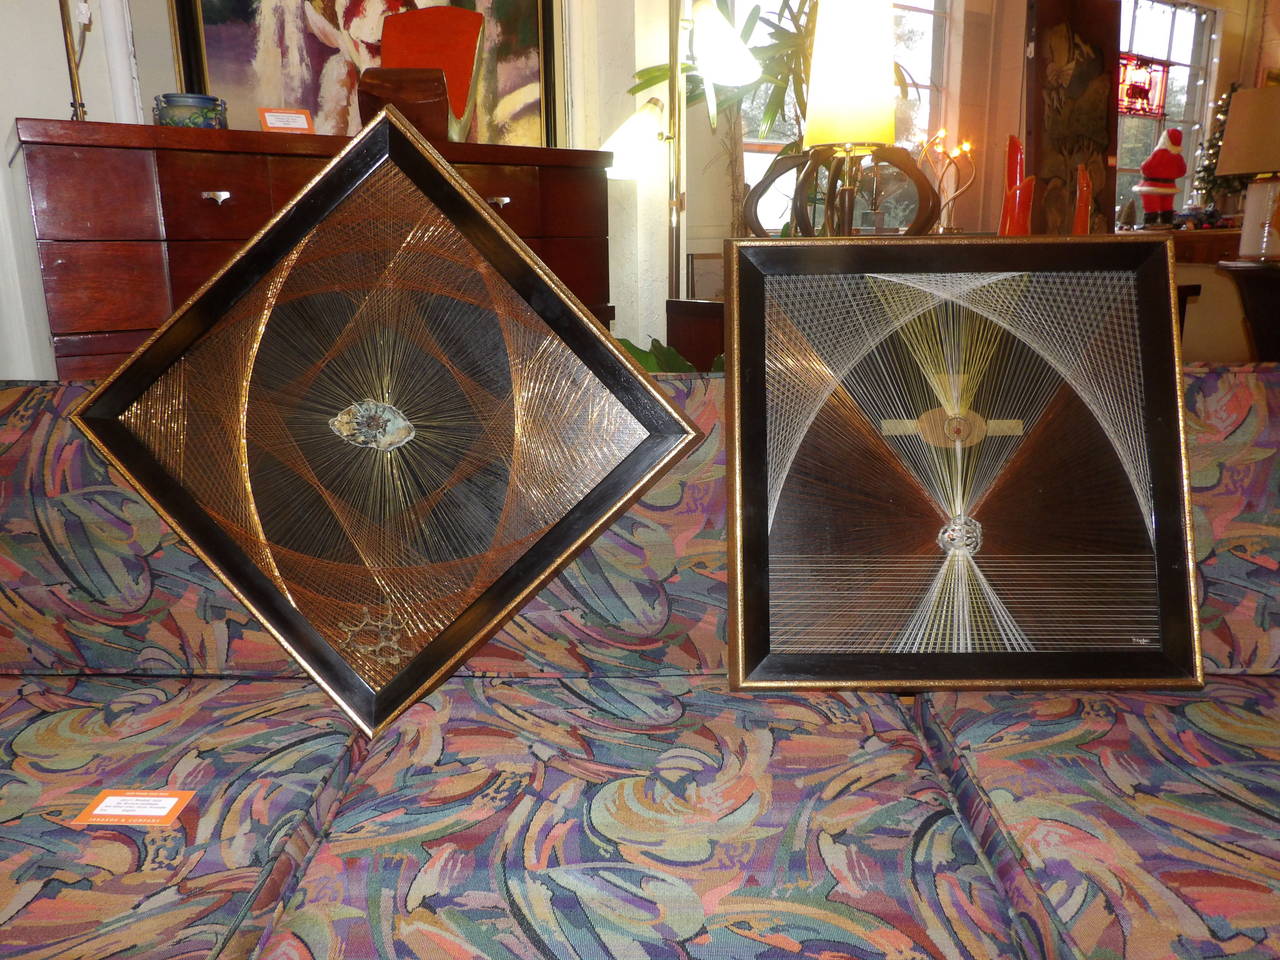 A great example of optical art from the 1960s. Consisting of copper wire, fishing line and fine string with applied abstract bronze and copper objects. Original frames. Artist signed and dated 1964. Light reflection at various angles is amazing.